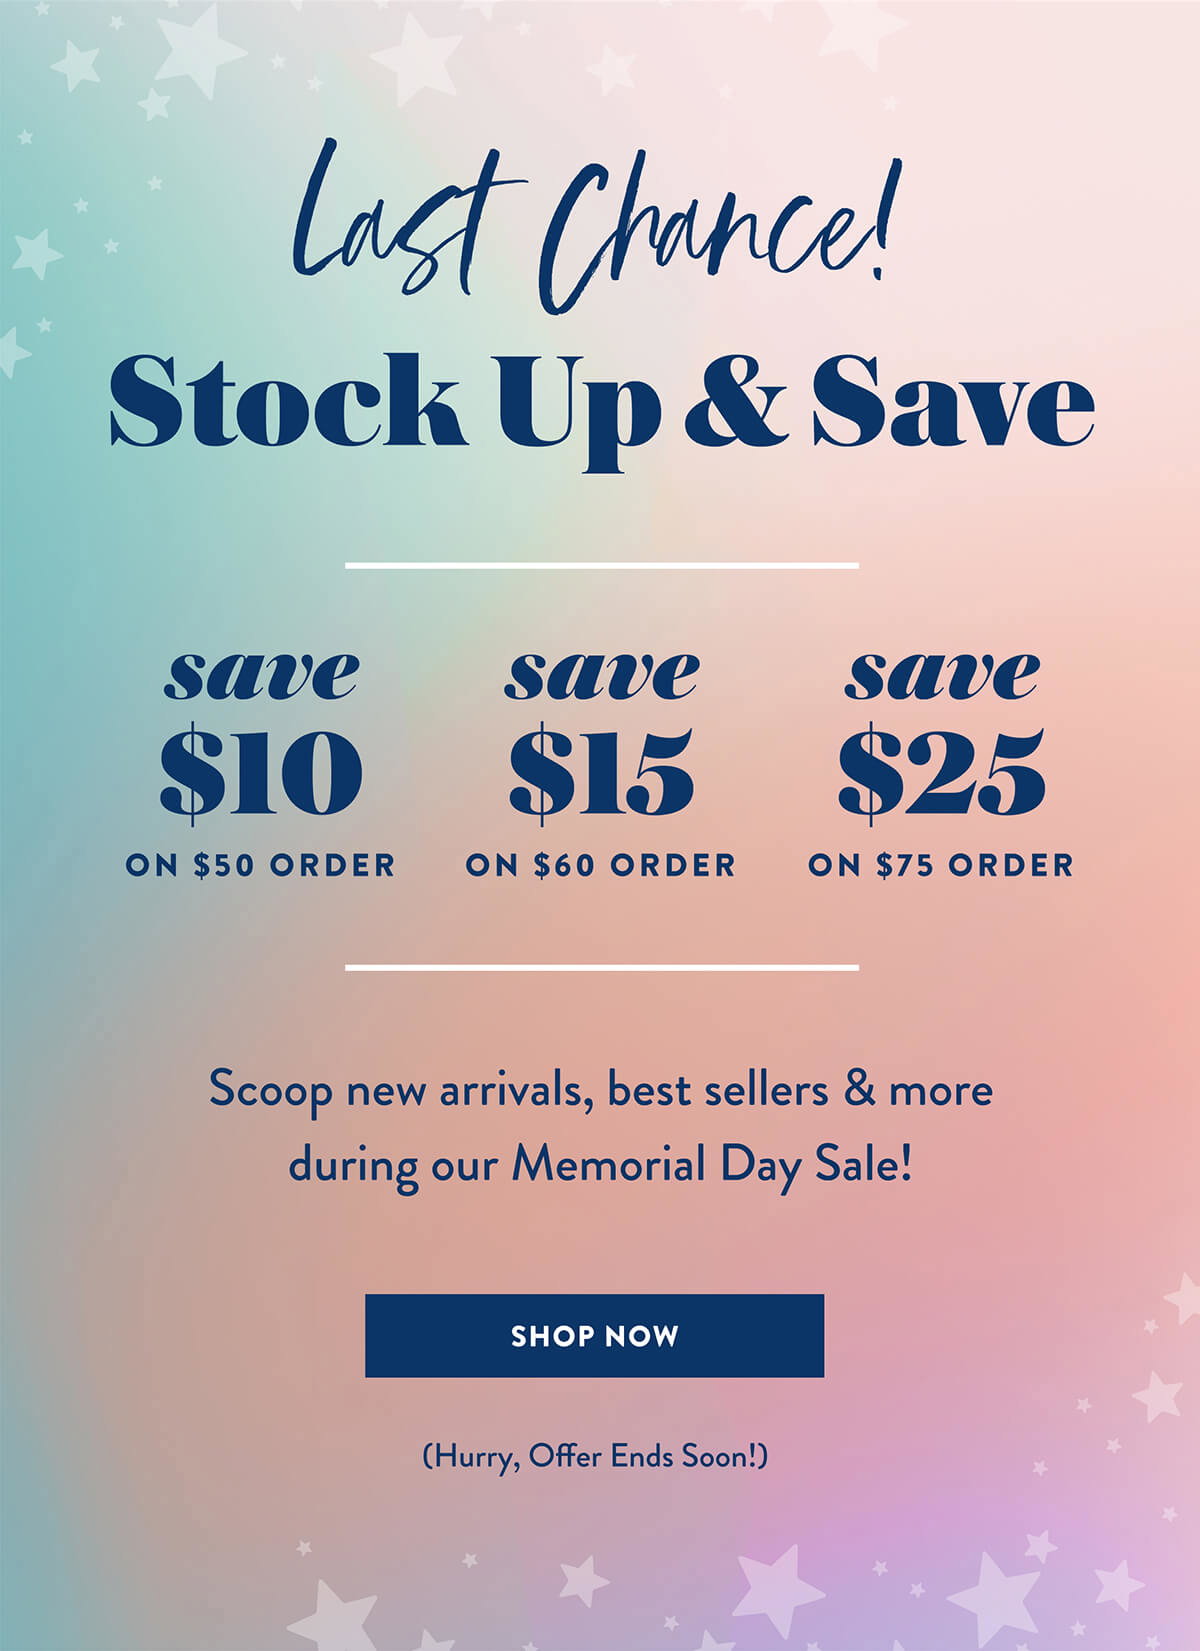 Warehouse Sale is ON! Up to 60% off 200+ items! - Erin Condren Design